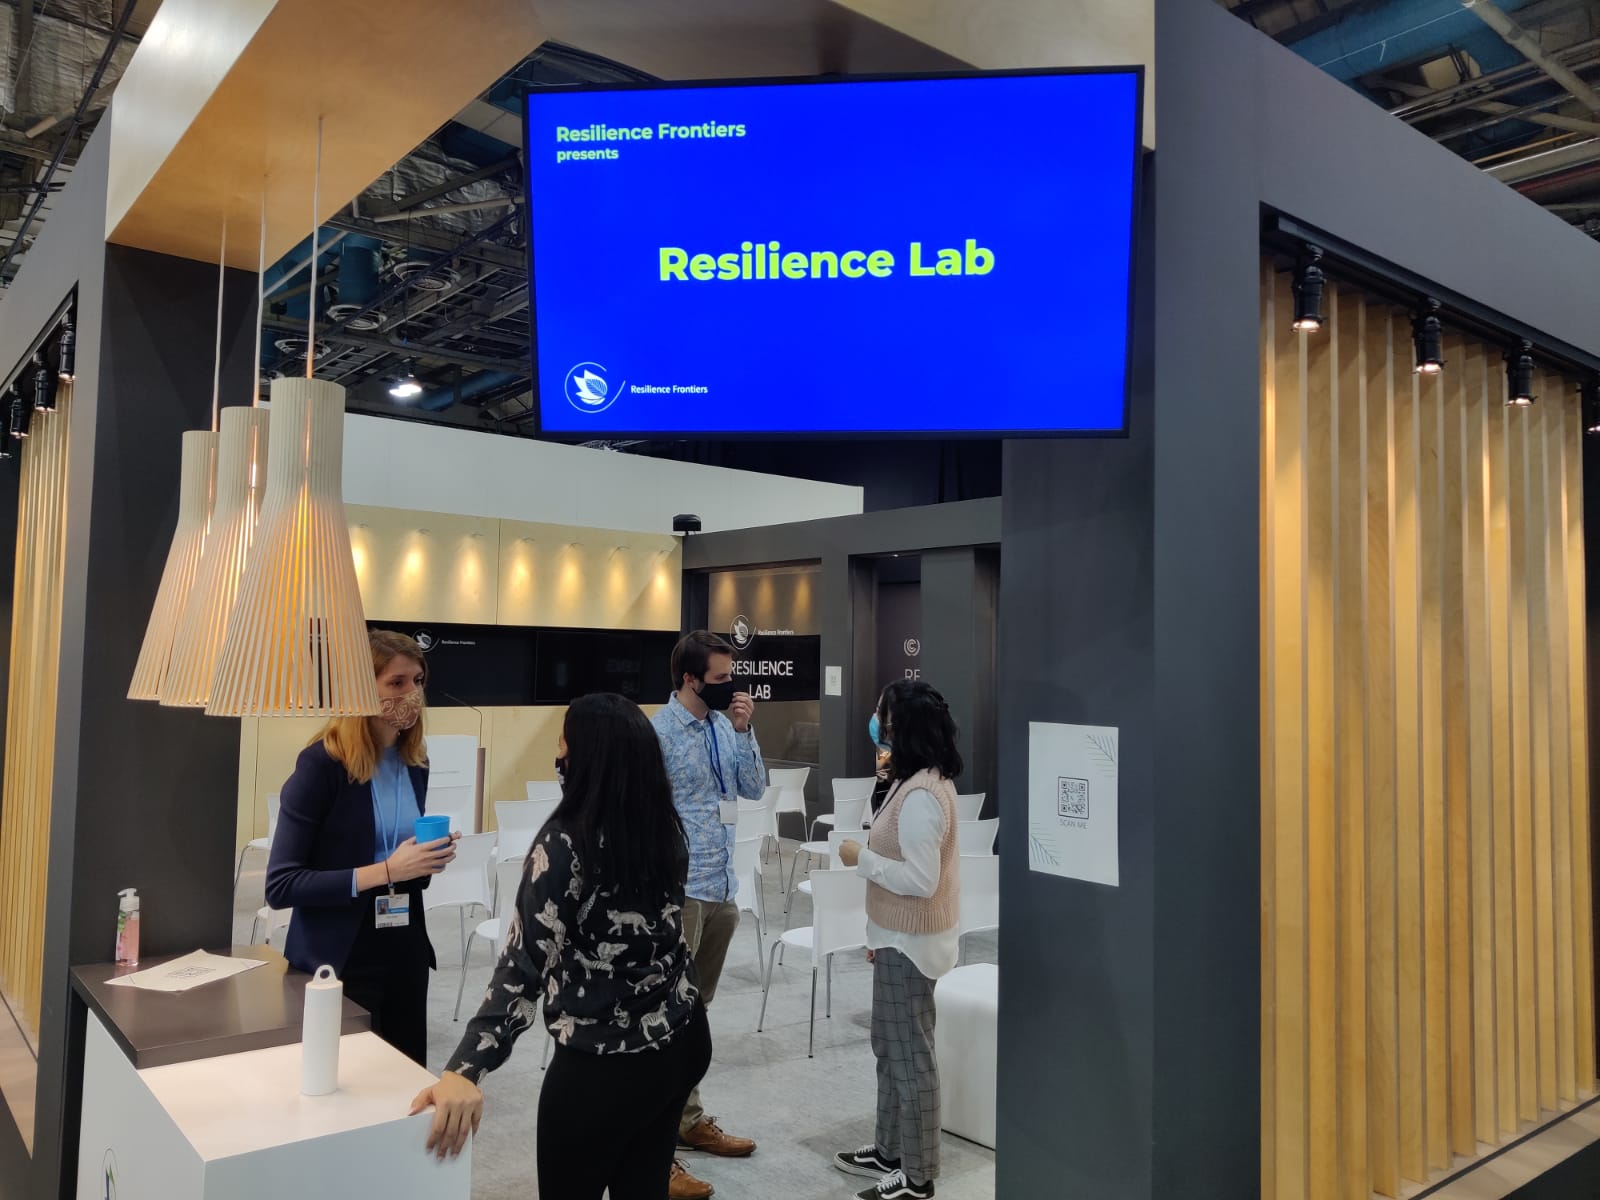 Resilience Lab at COP26